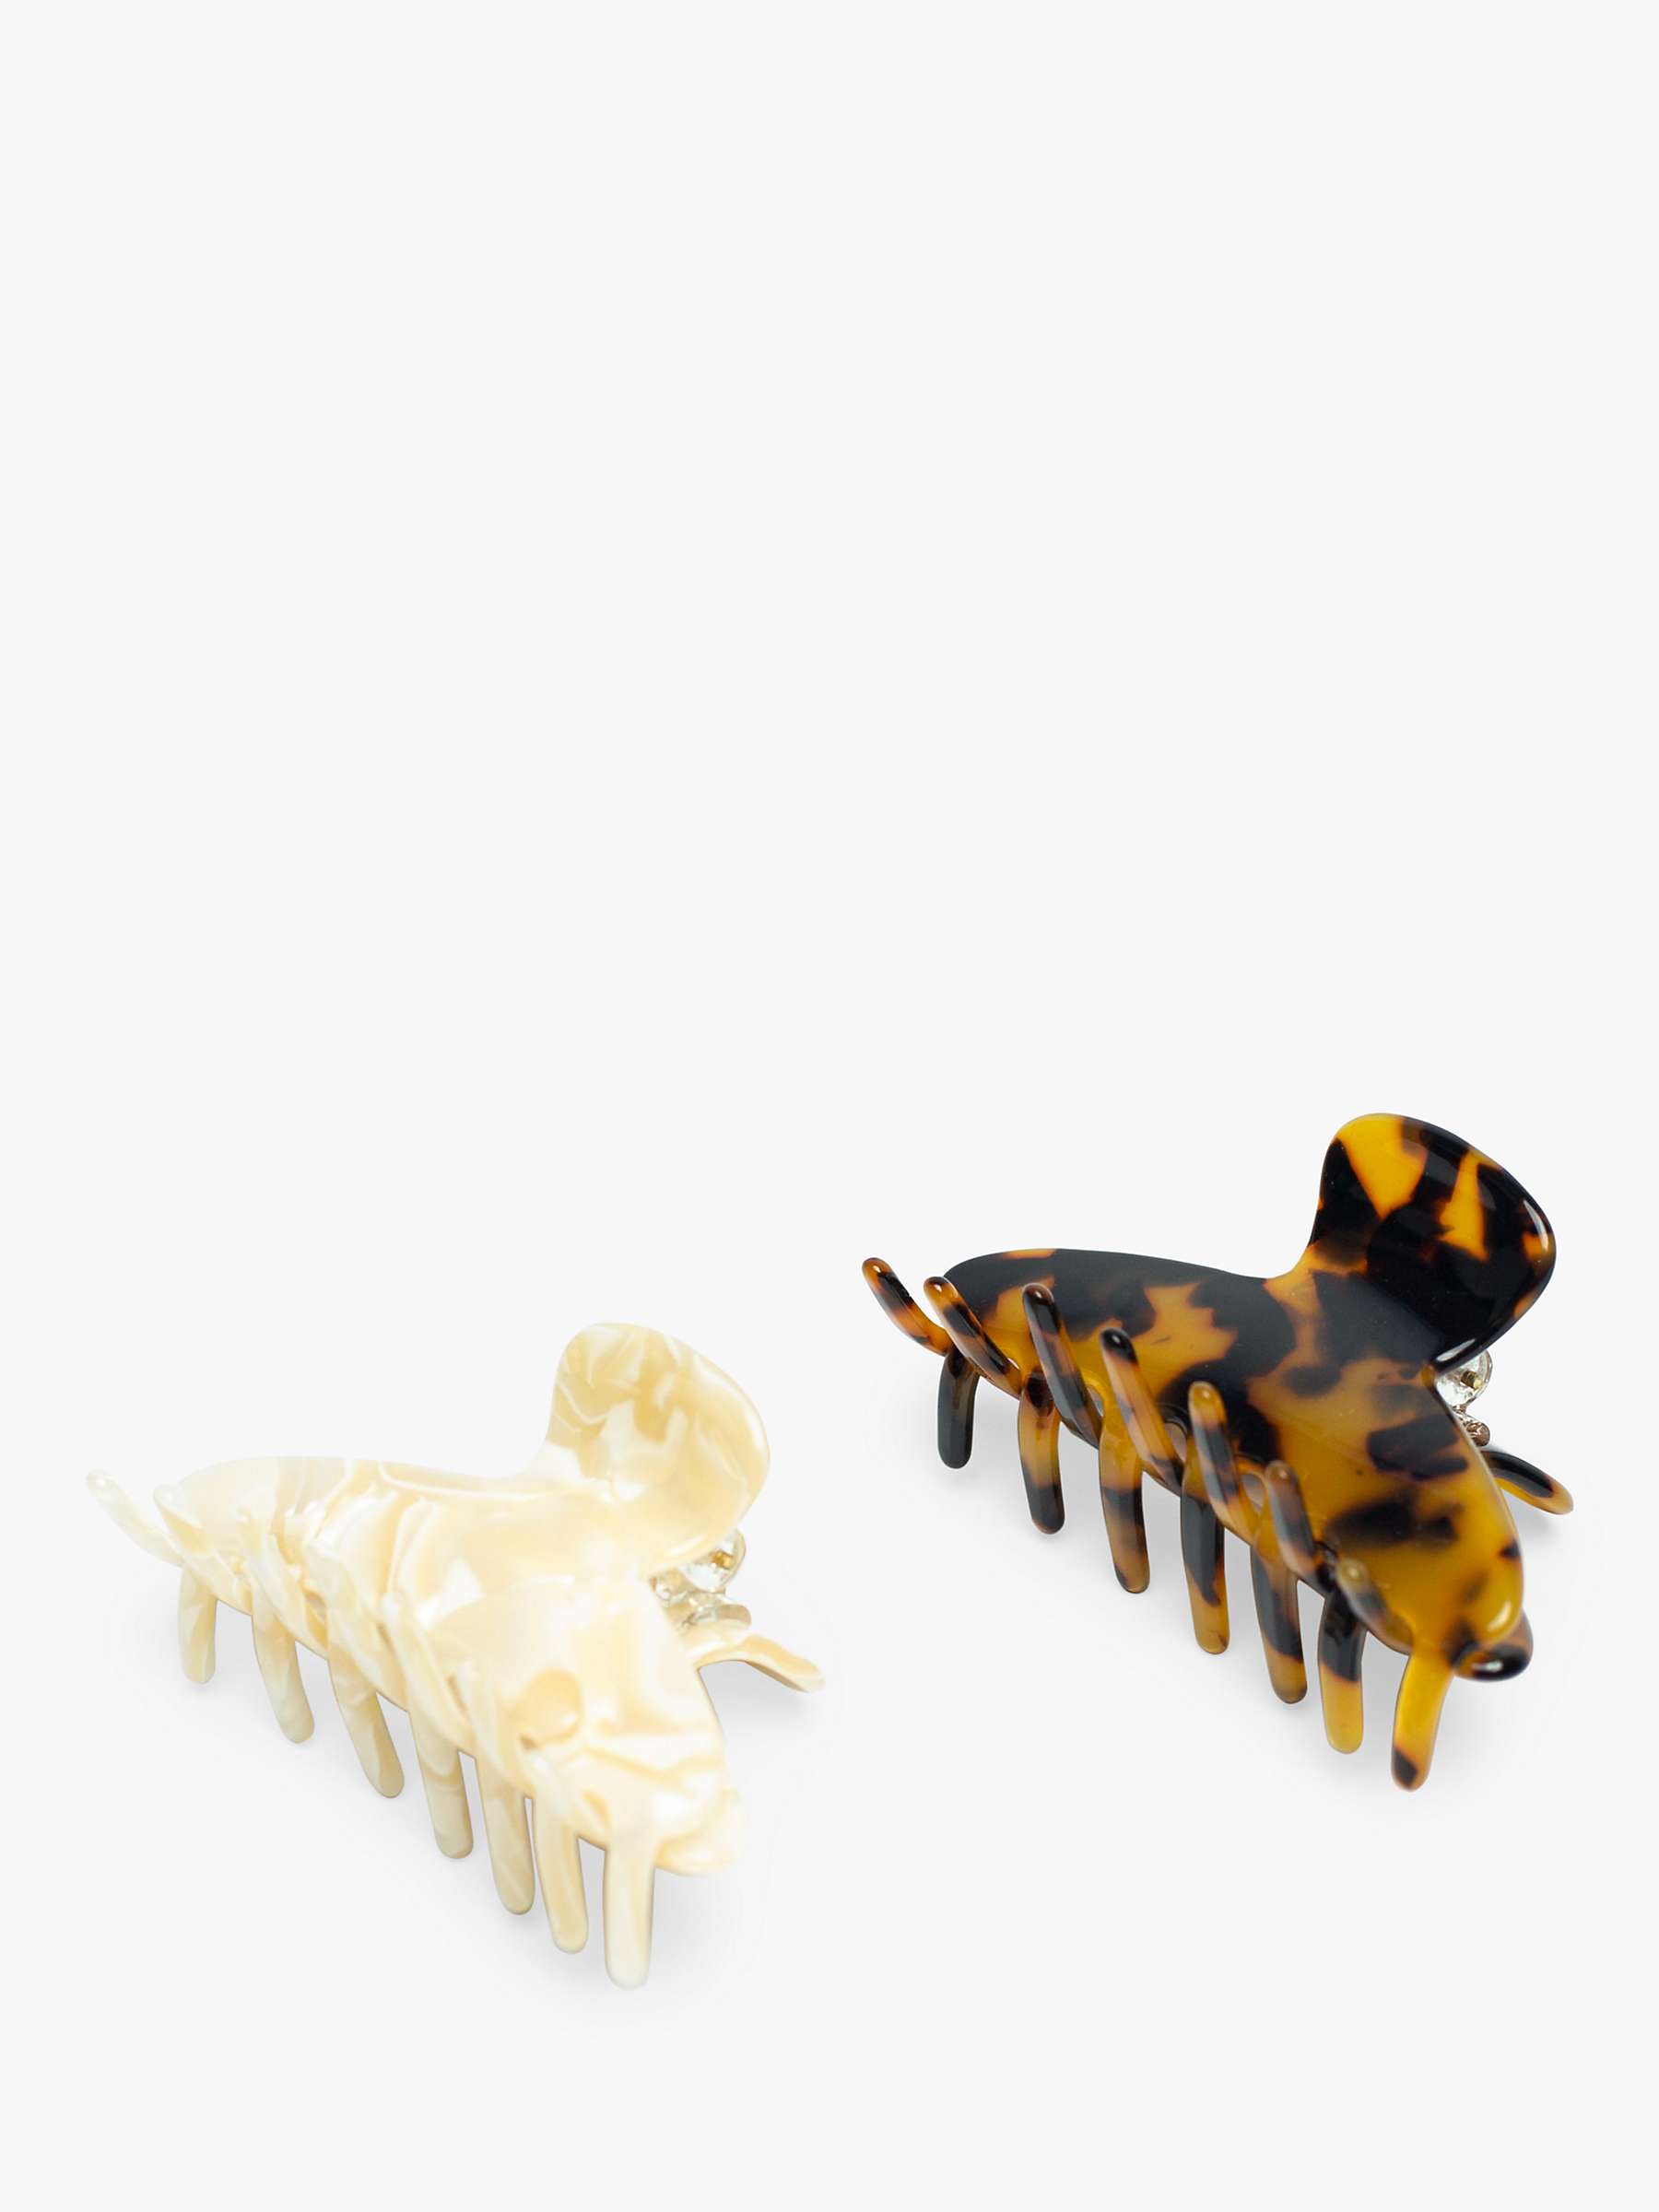 Buy Bloom & Bay Olive Pearlescent Swirl & Tortoiseshell Claw Set, Cream/Brown Online at johnlewis.com